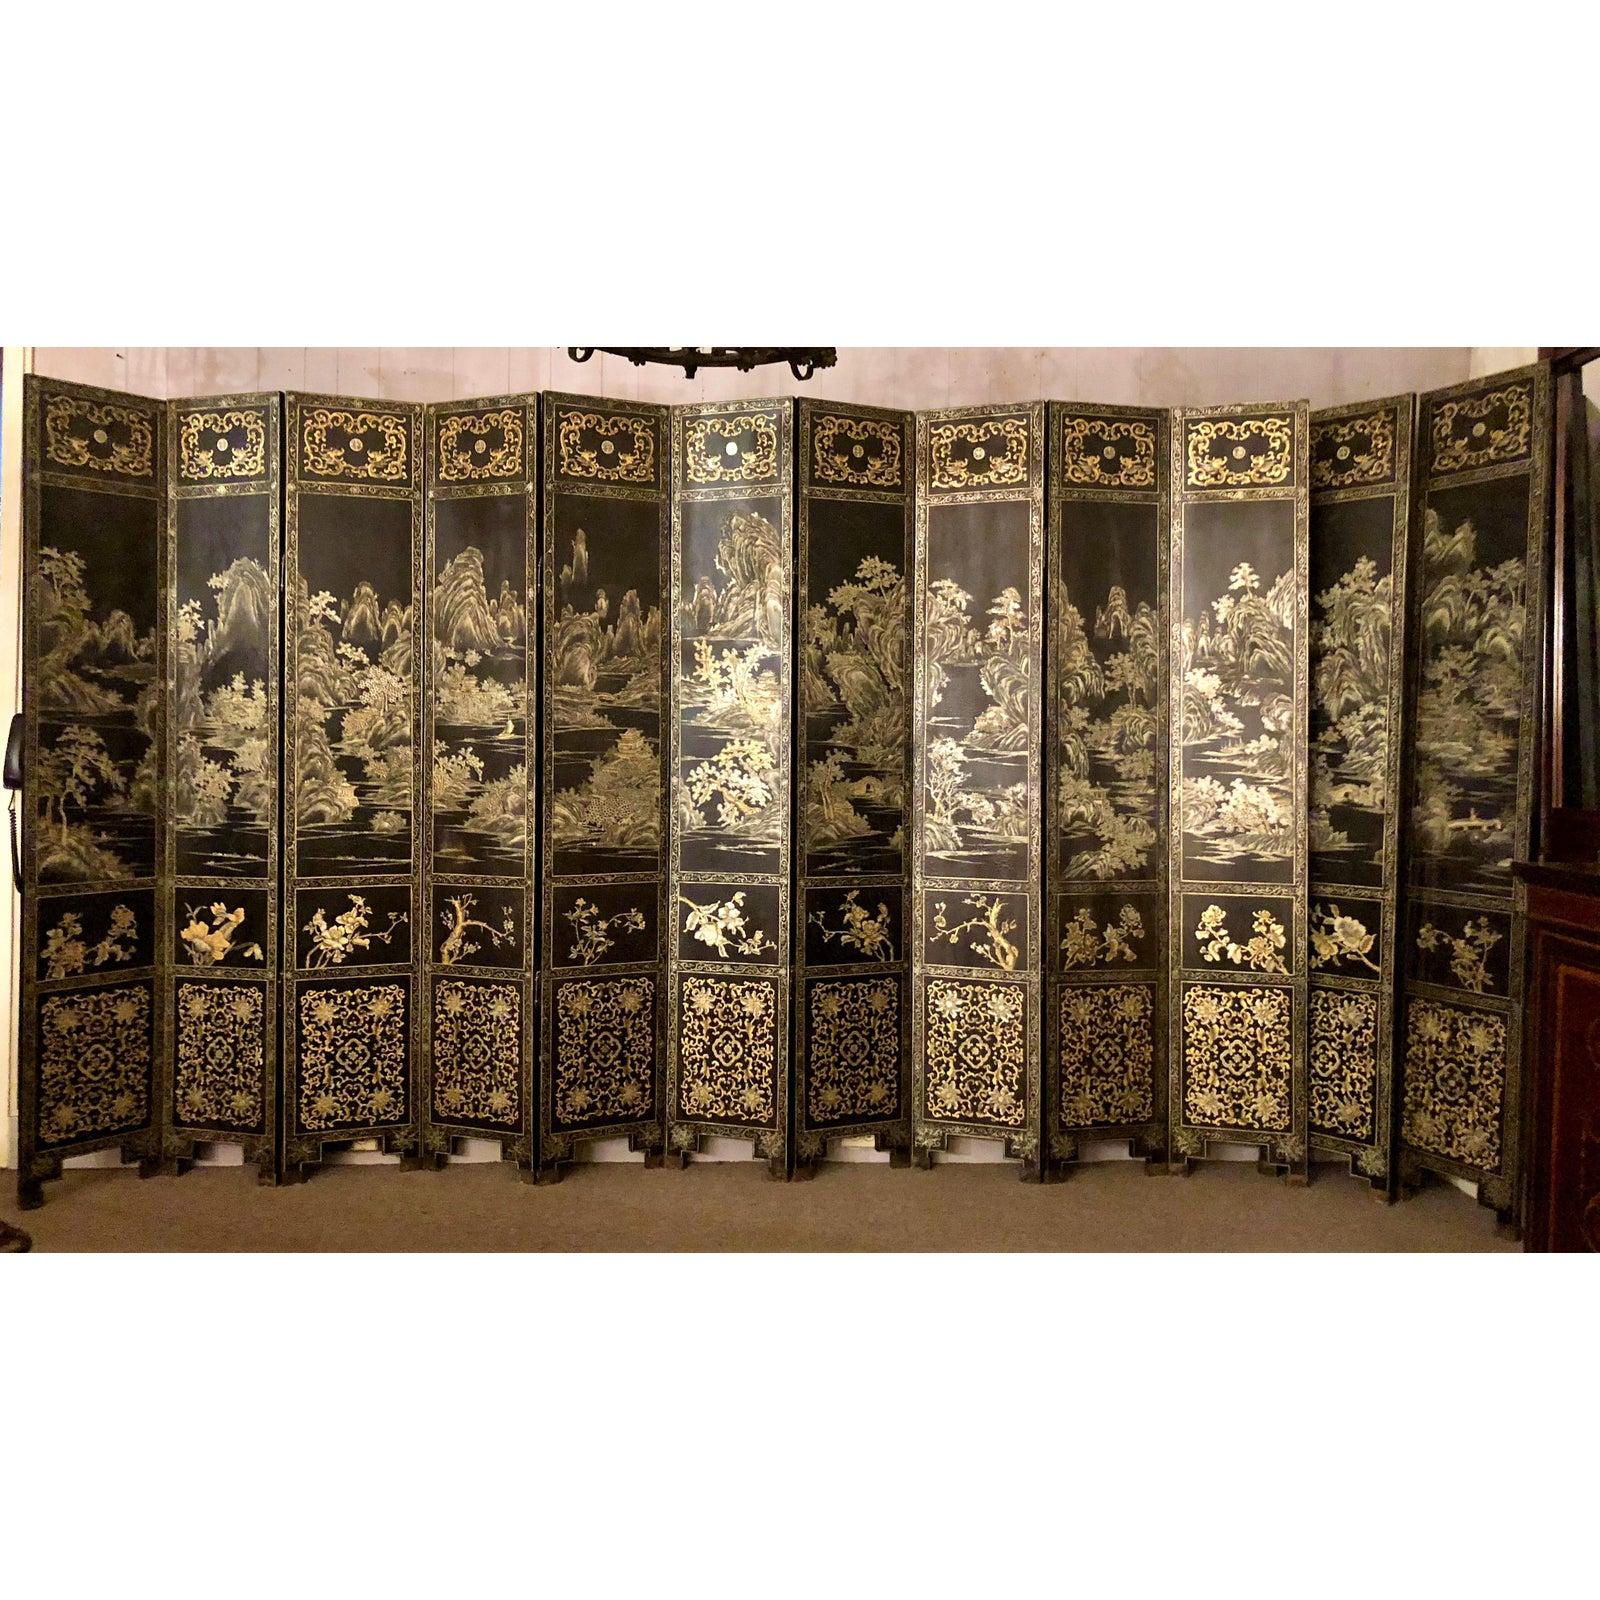 This 12 panel laquered screen tells stories on its panels and each panel measures approximately 14 inches wide. It is a real beauty and at 82 inches high, can really serve as a room separator in addition to a decorative piece.
   